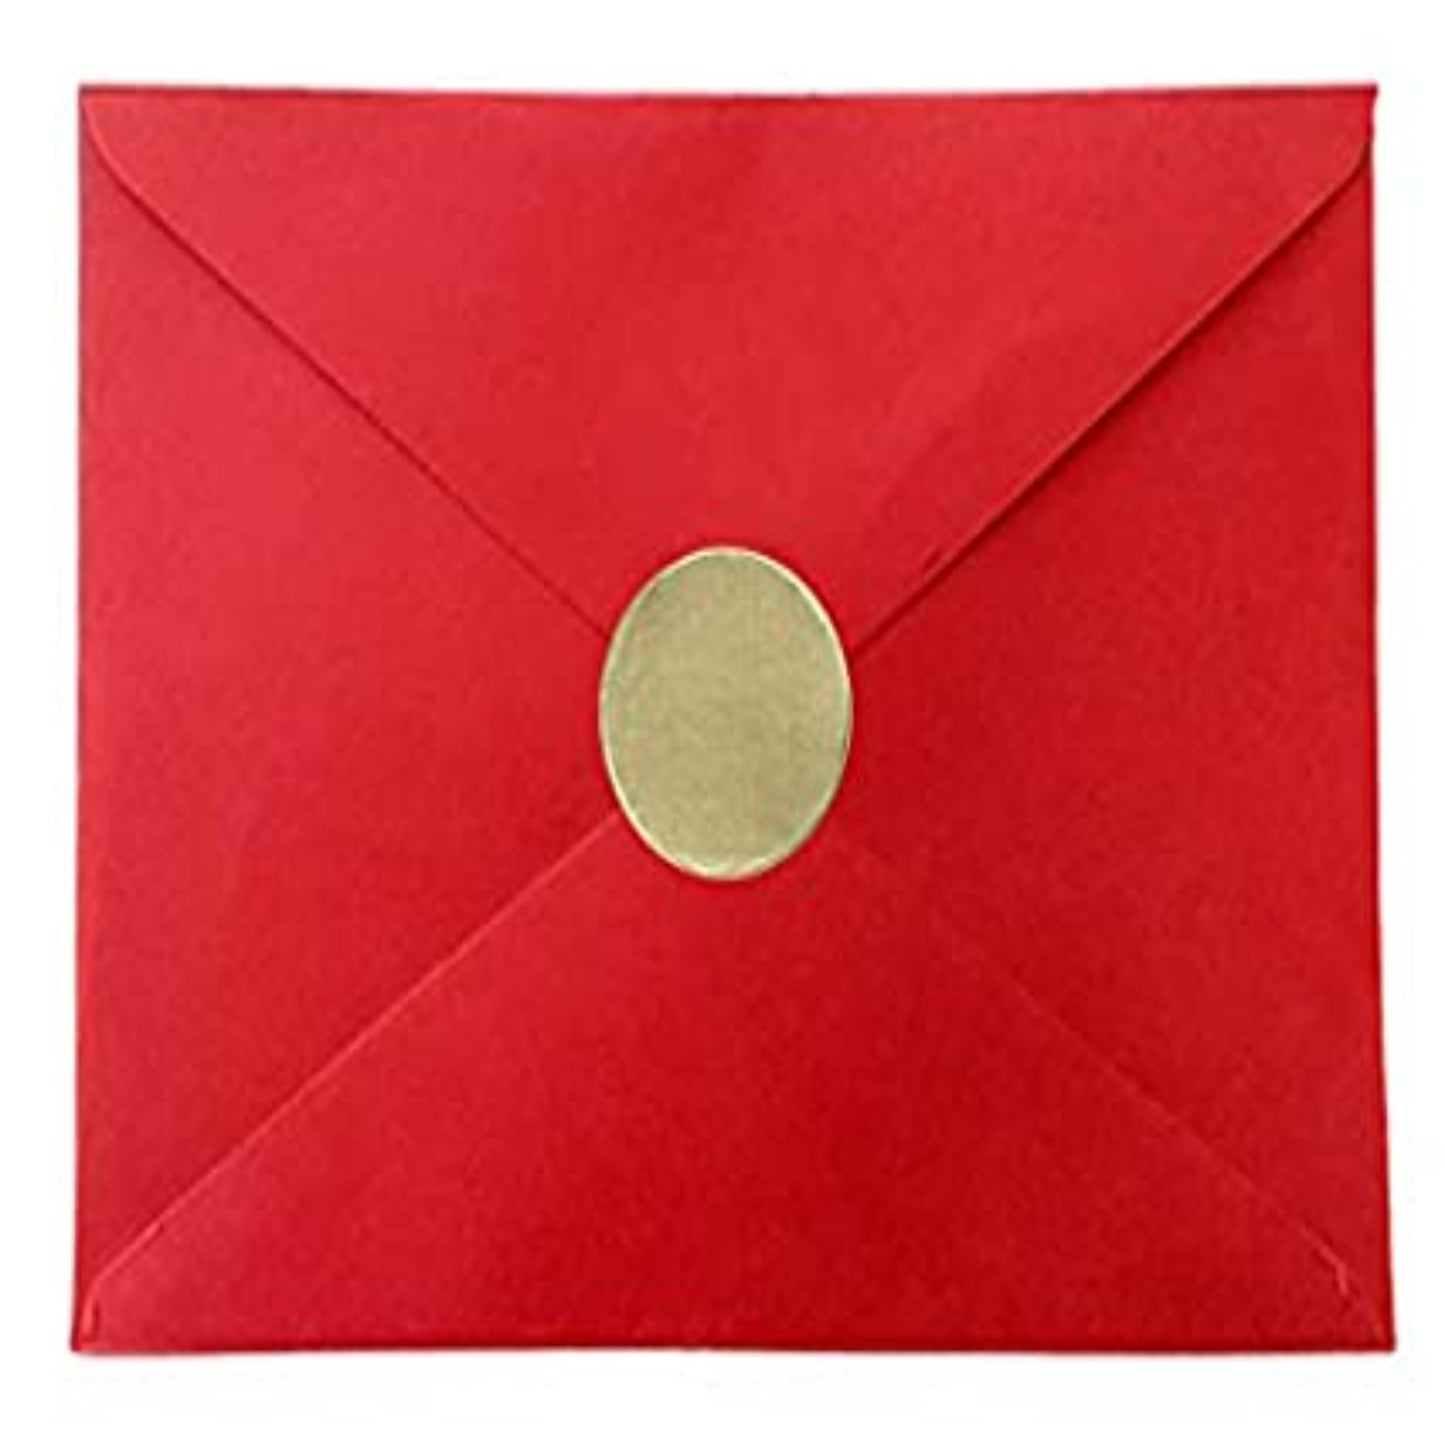 Accuprints Red Envelopes | Size - 5.15 X 7.15 inch |